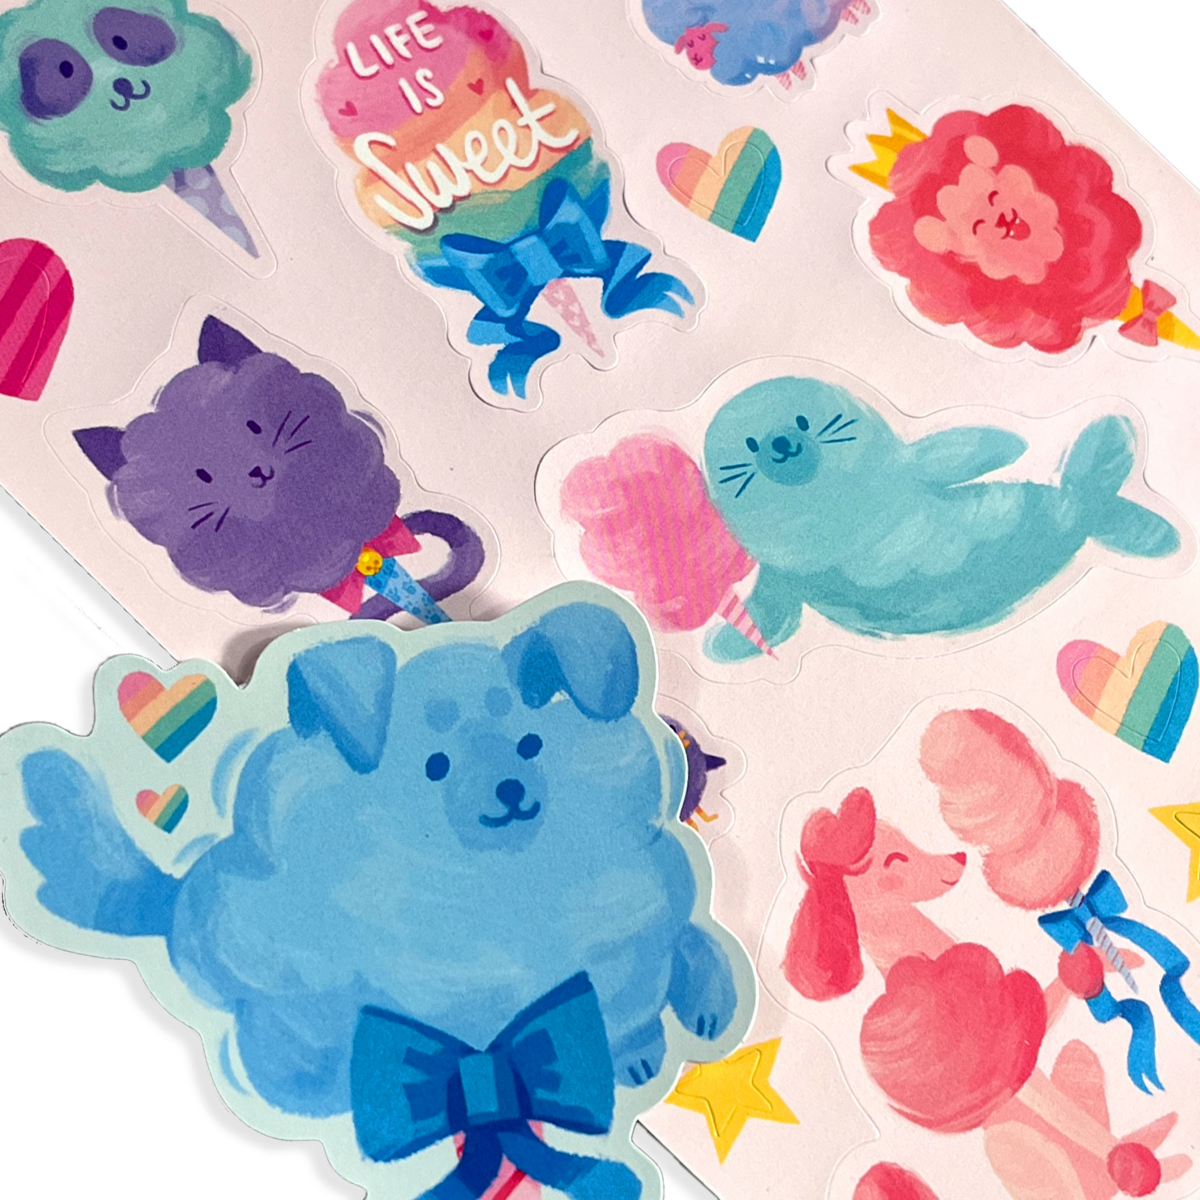 Cotton Candy Stickers